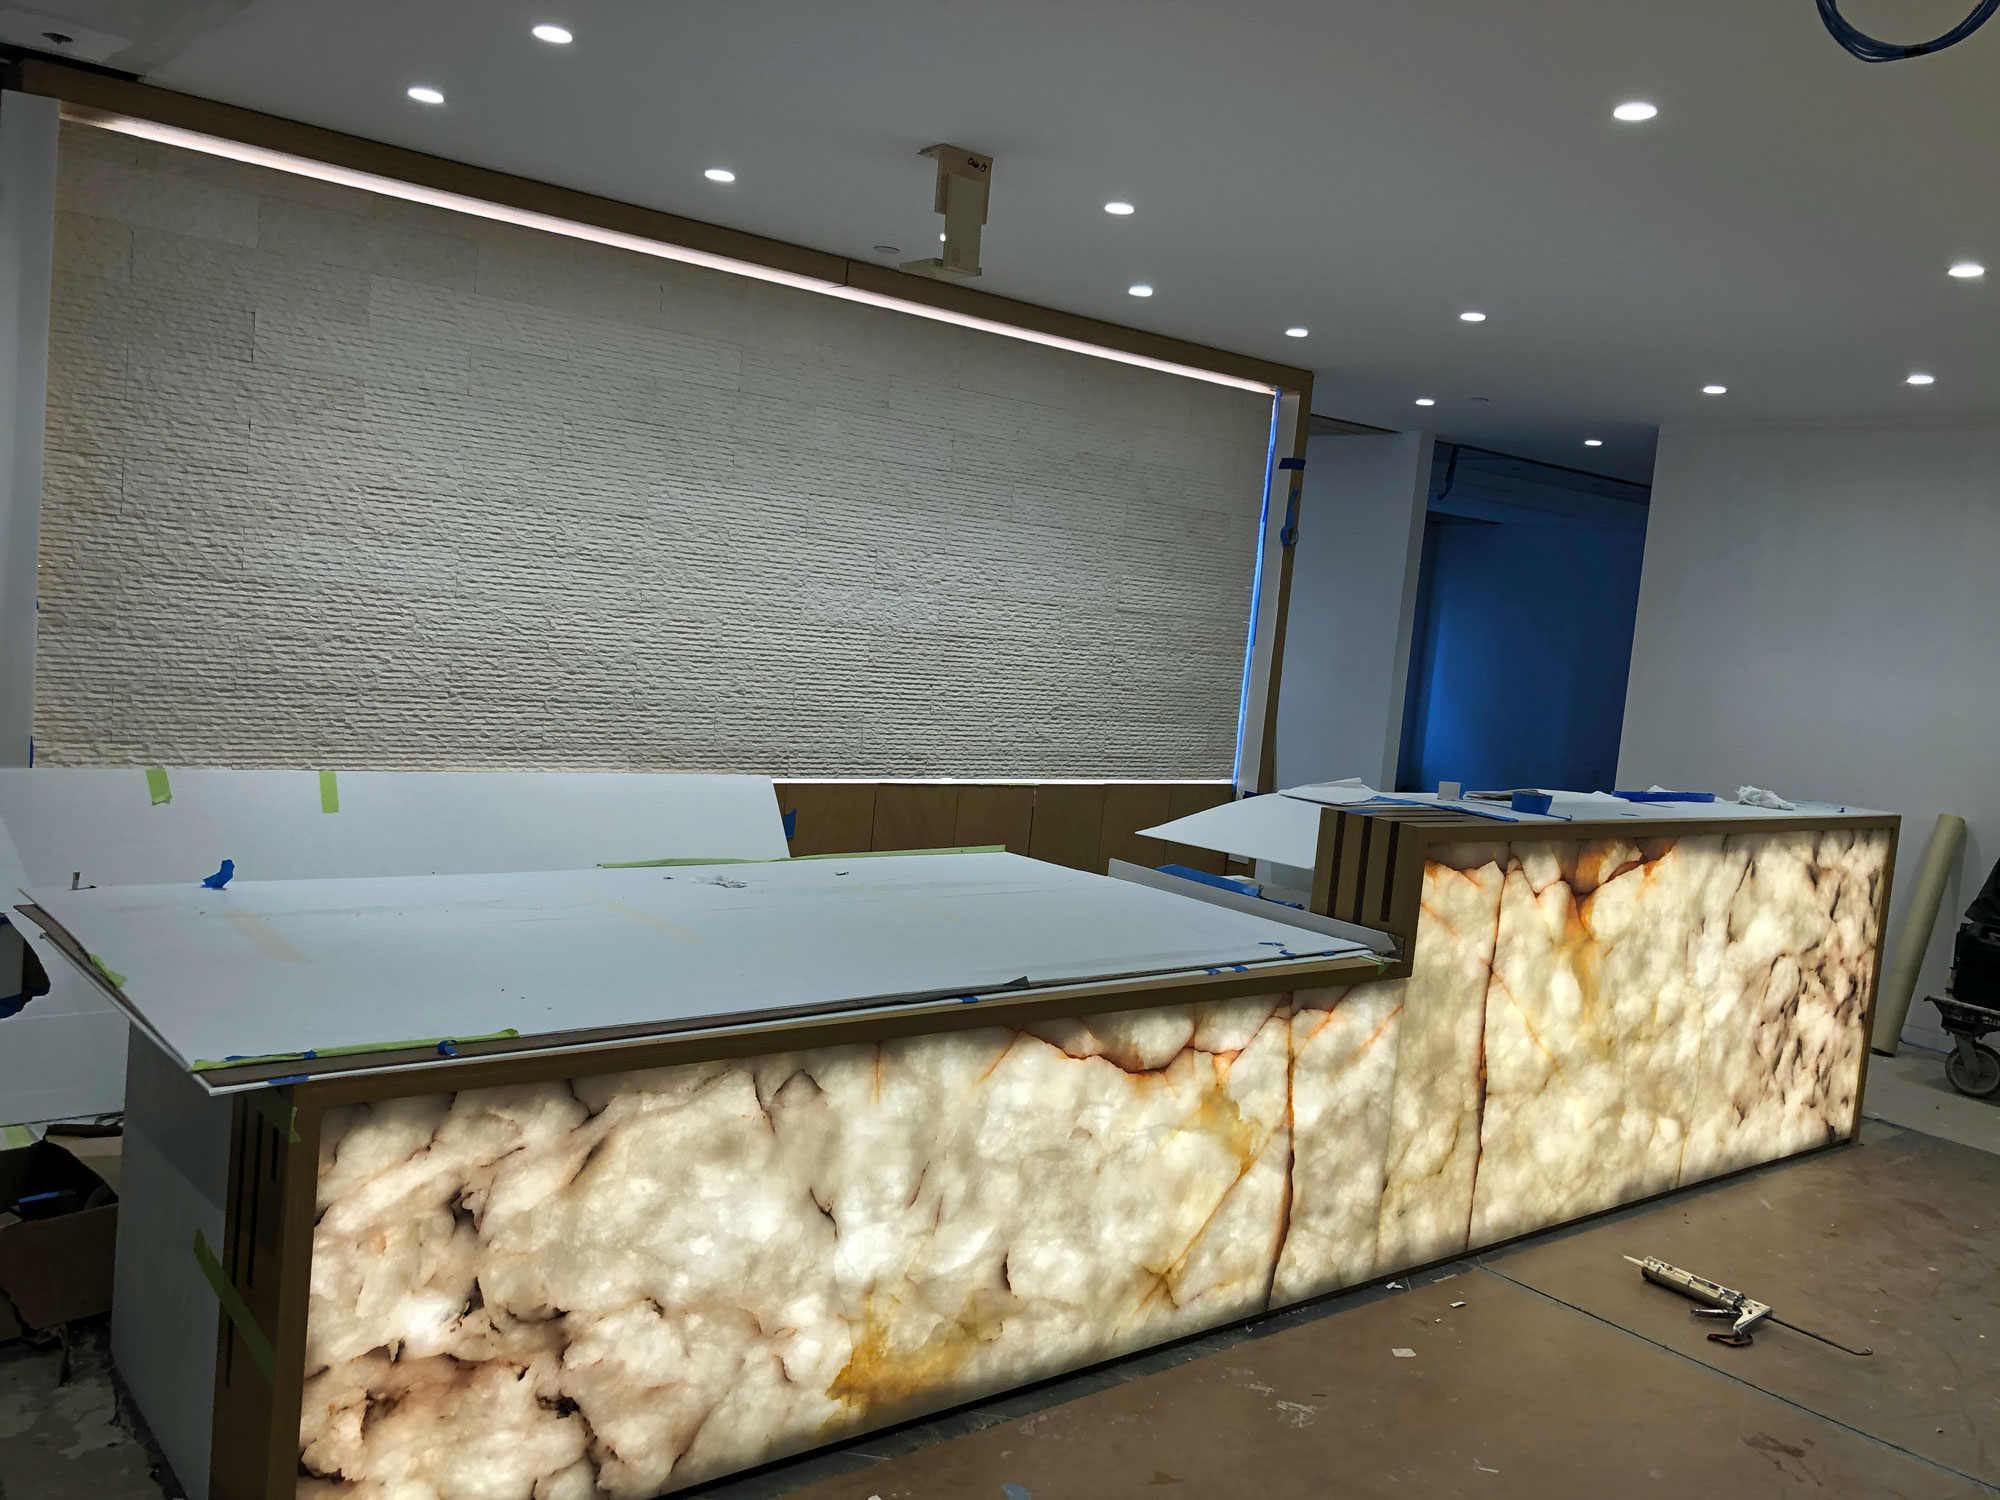 Commercial stone and tile fabrication and installation